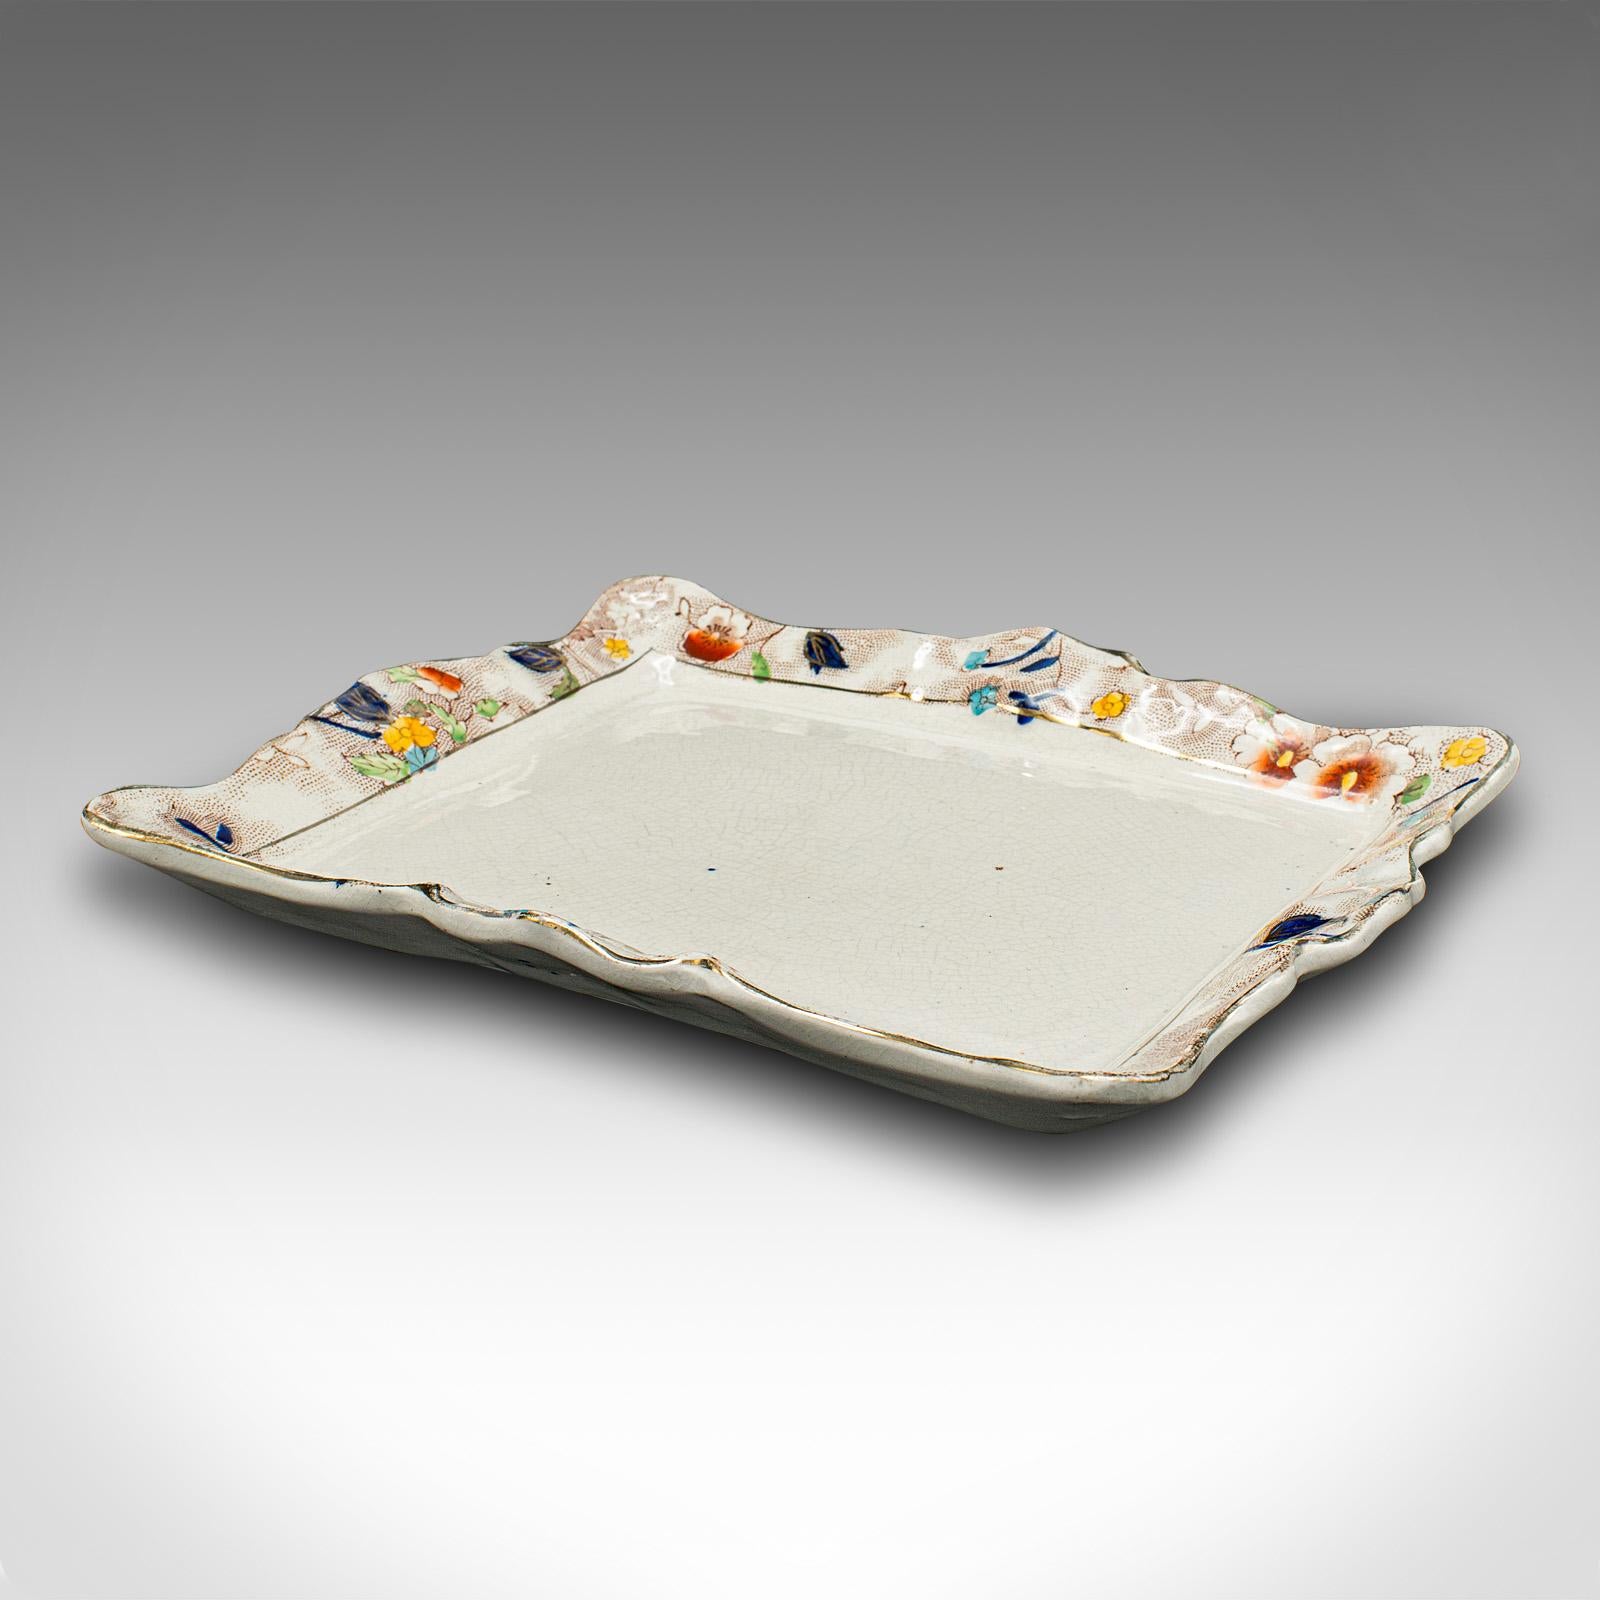 This is an antique cheese keeper. An English, ceramic decorative butter dish, dating to the late Victorian period, circa 1900.

Appealingly decorative dish - broad top suitable for cheese or butter
Displaying a desirable aged patina and in good